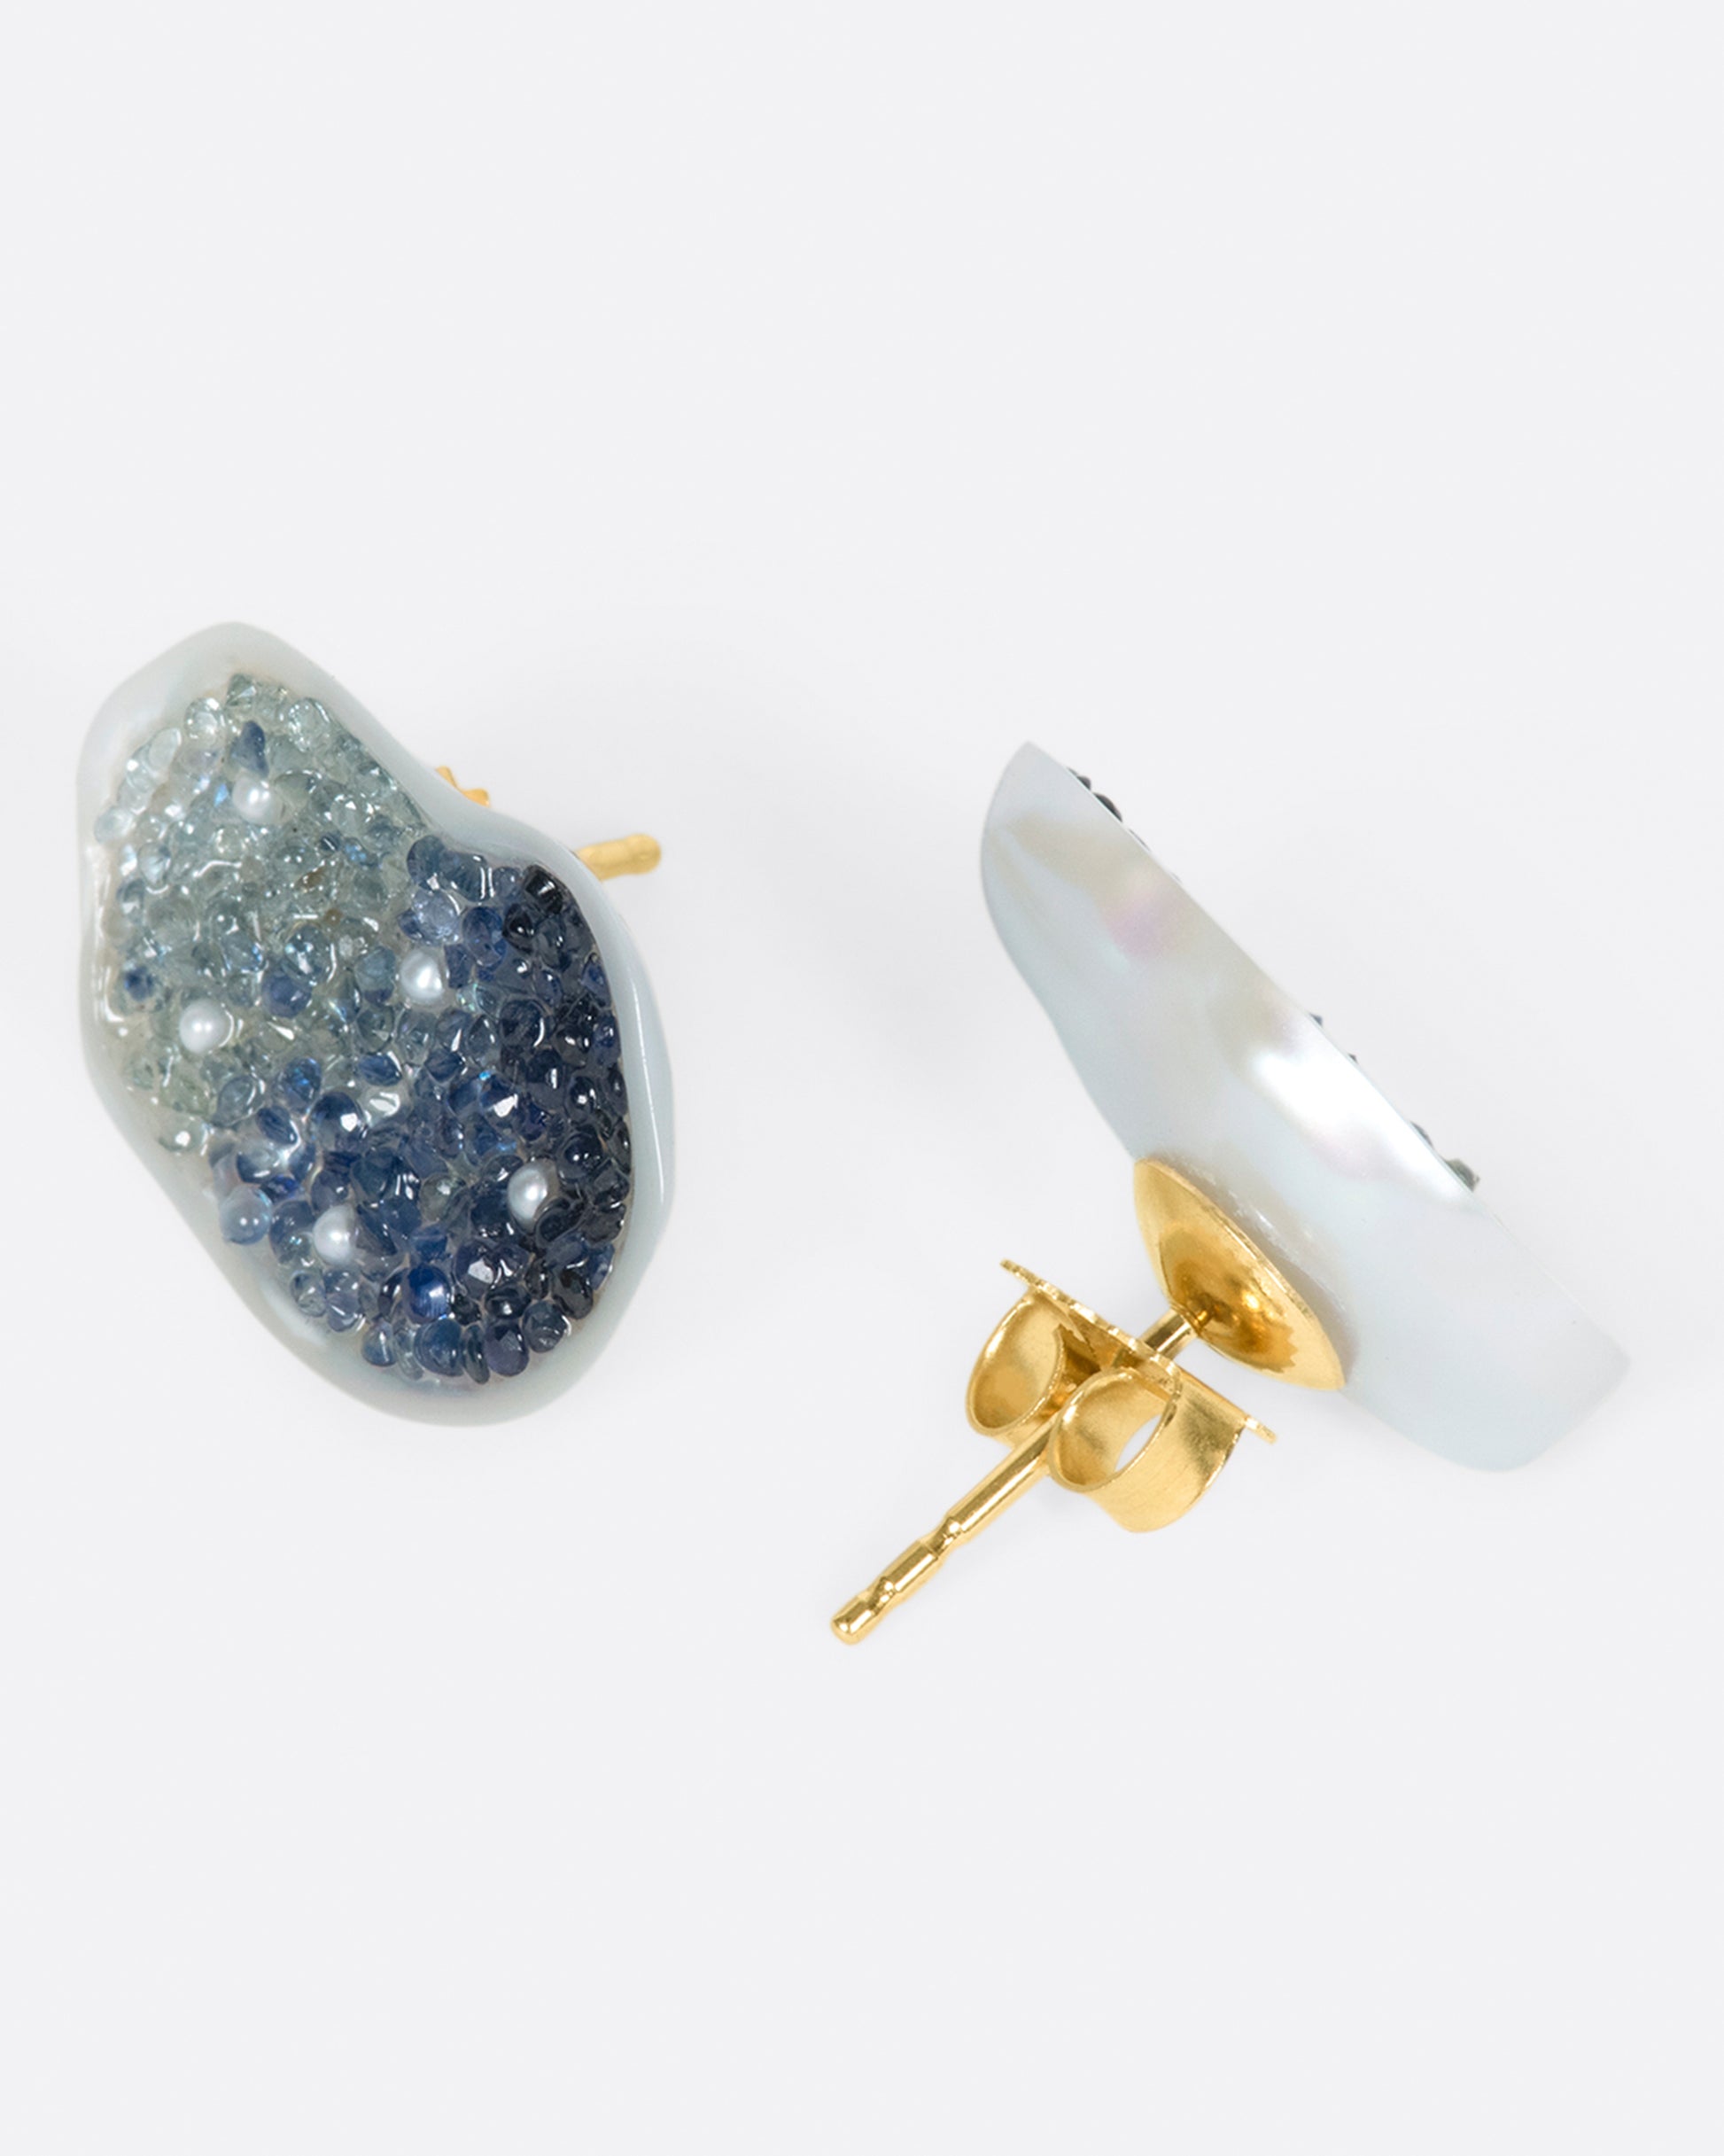 A pair of stud earrings made from halves on one freshwater soufflé pearl, lined with blue sapphires and seed pearls.